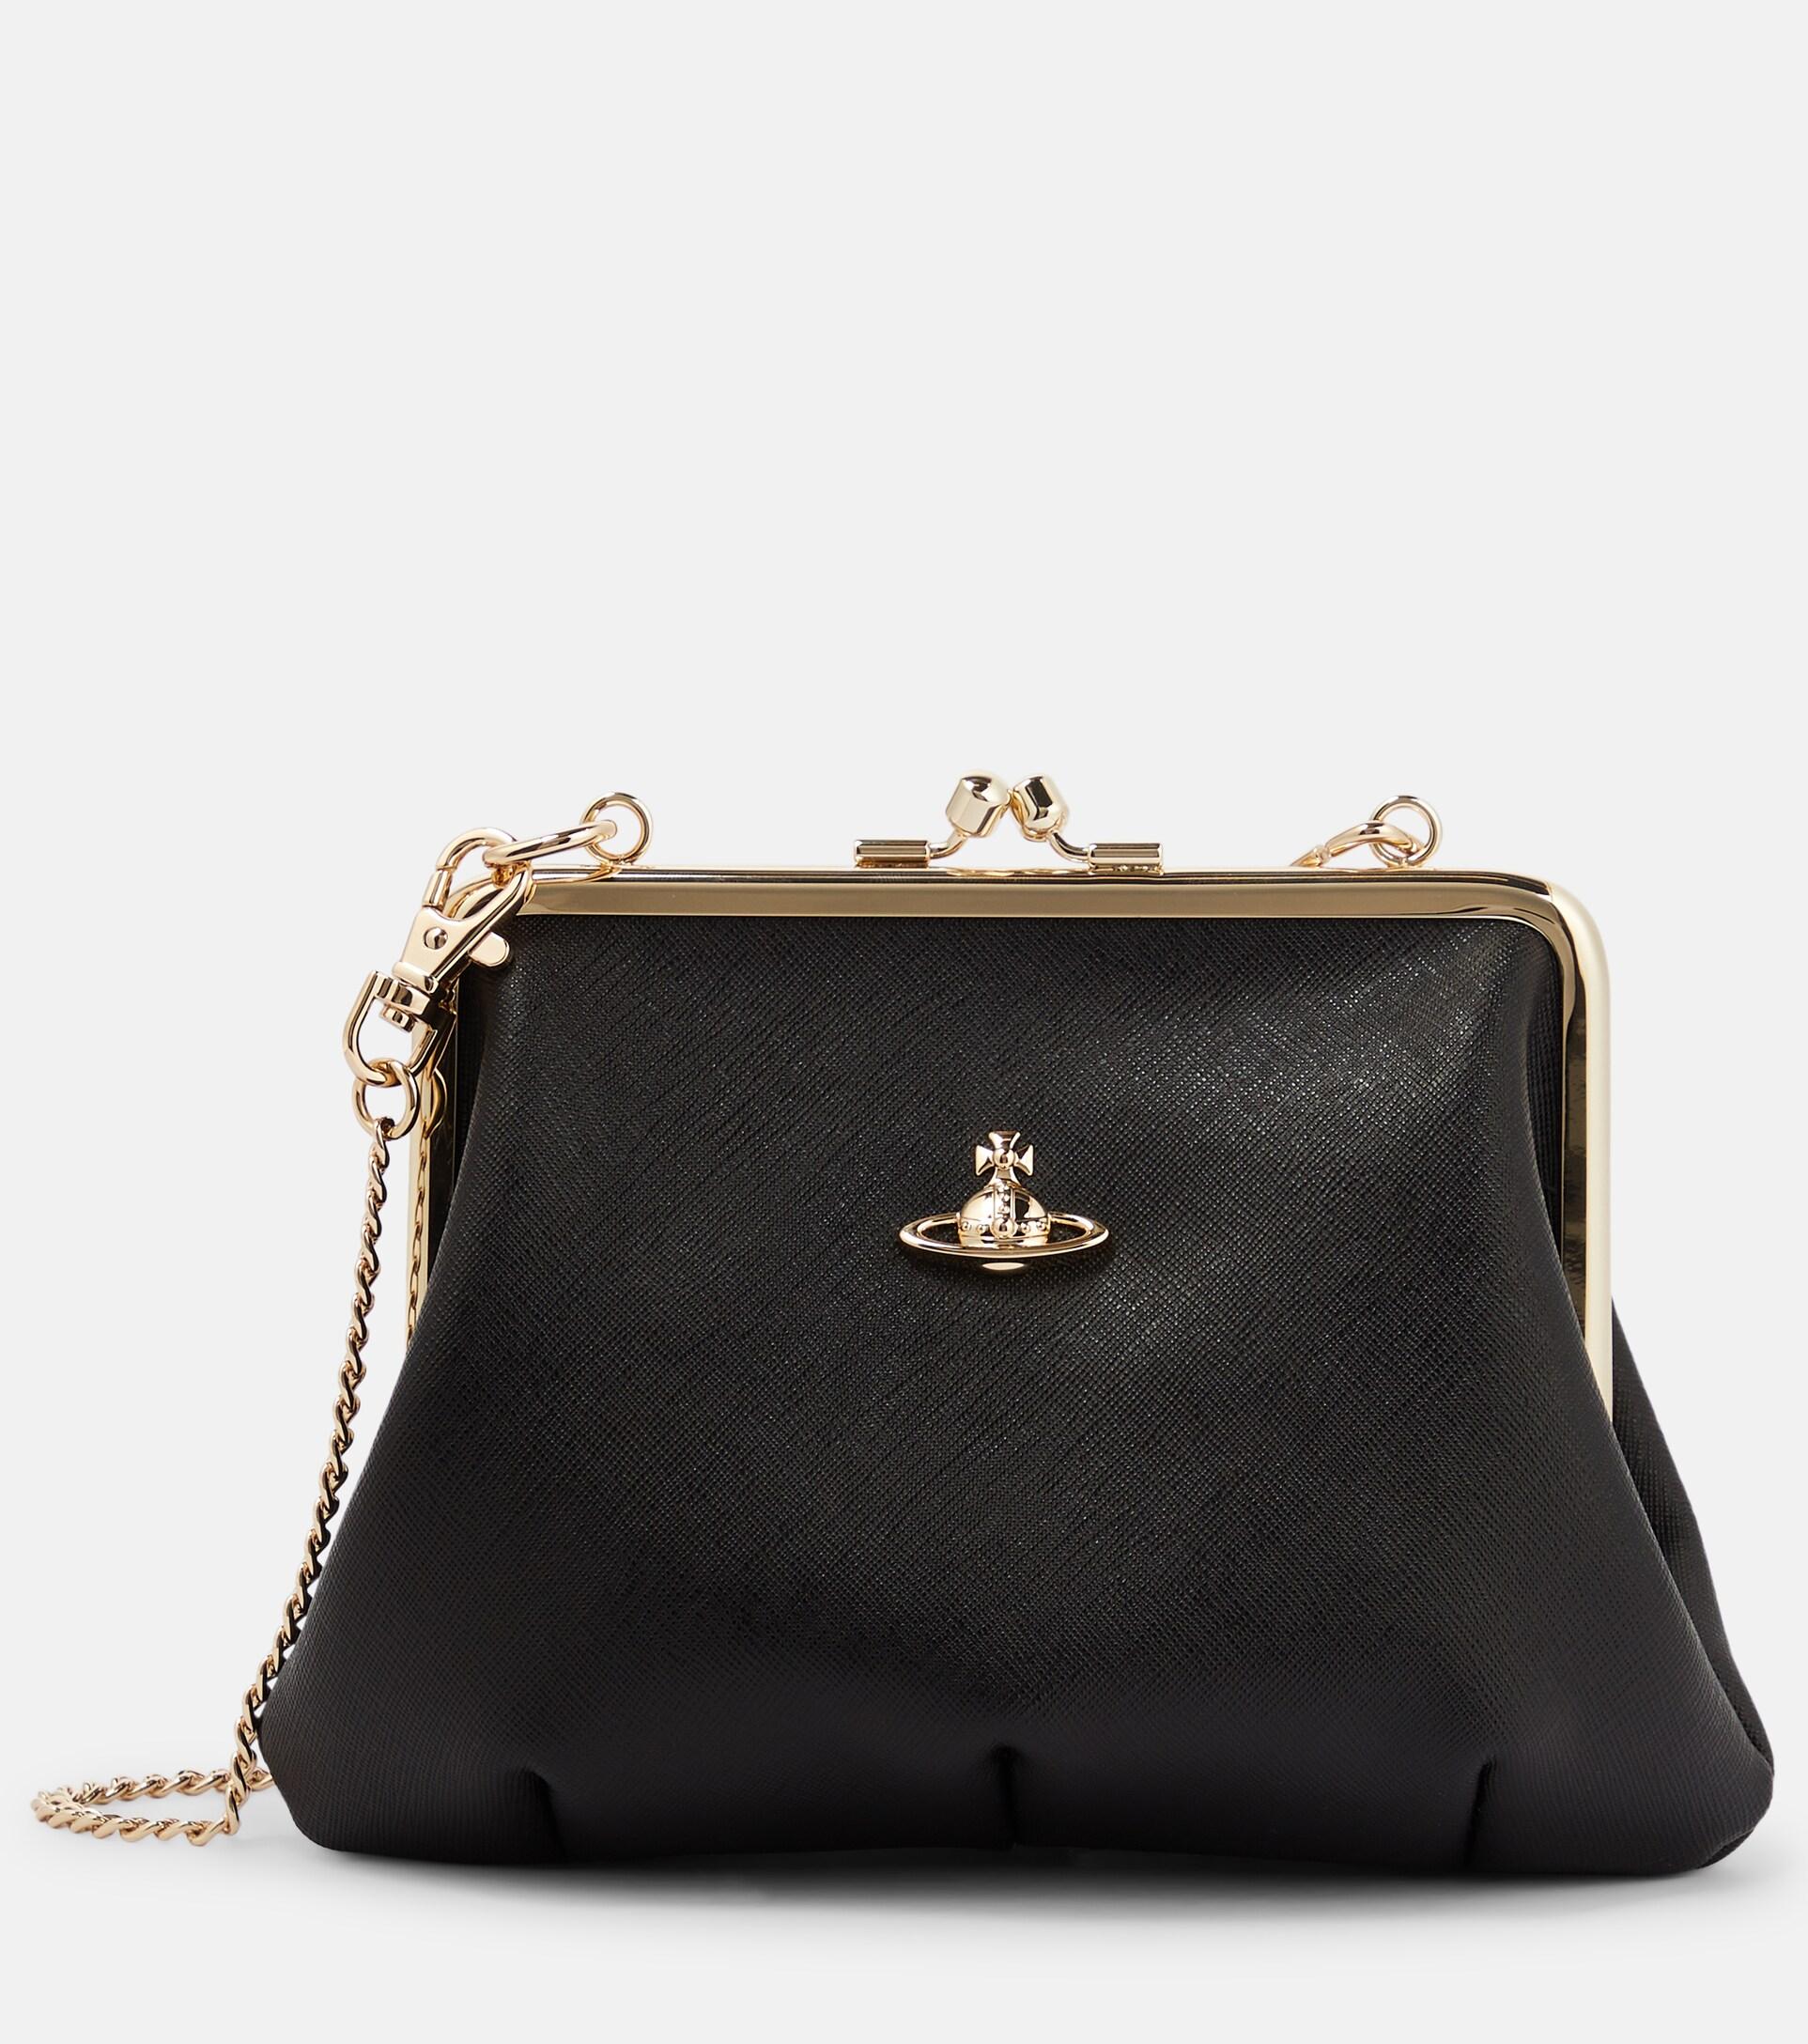 Vivienne Westwood Granny Frame Leather Clutch in Black | Lyst